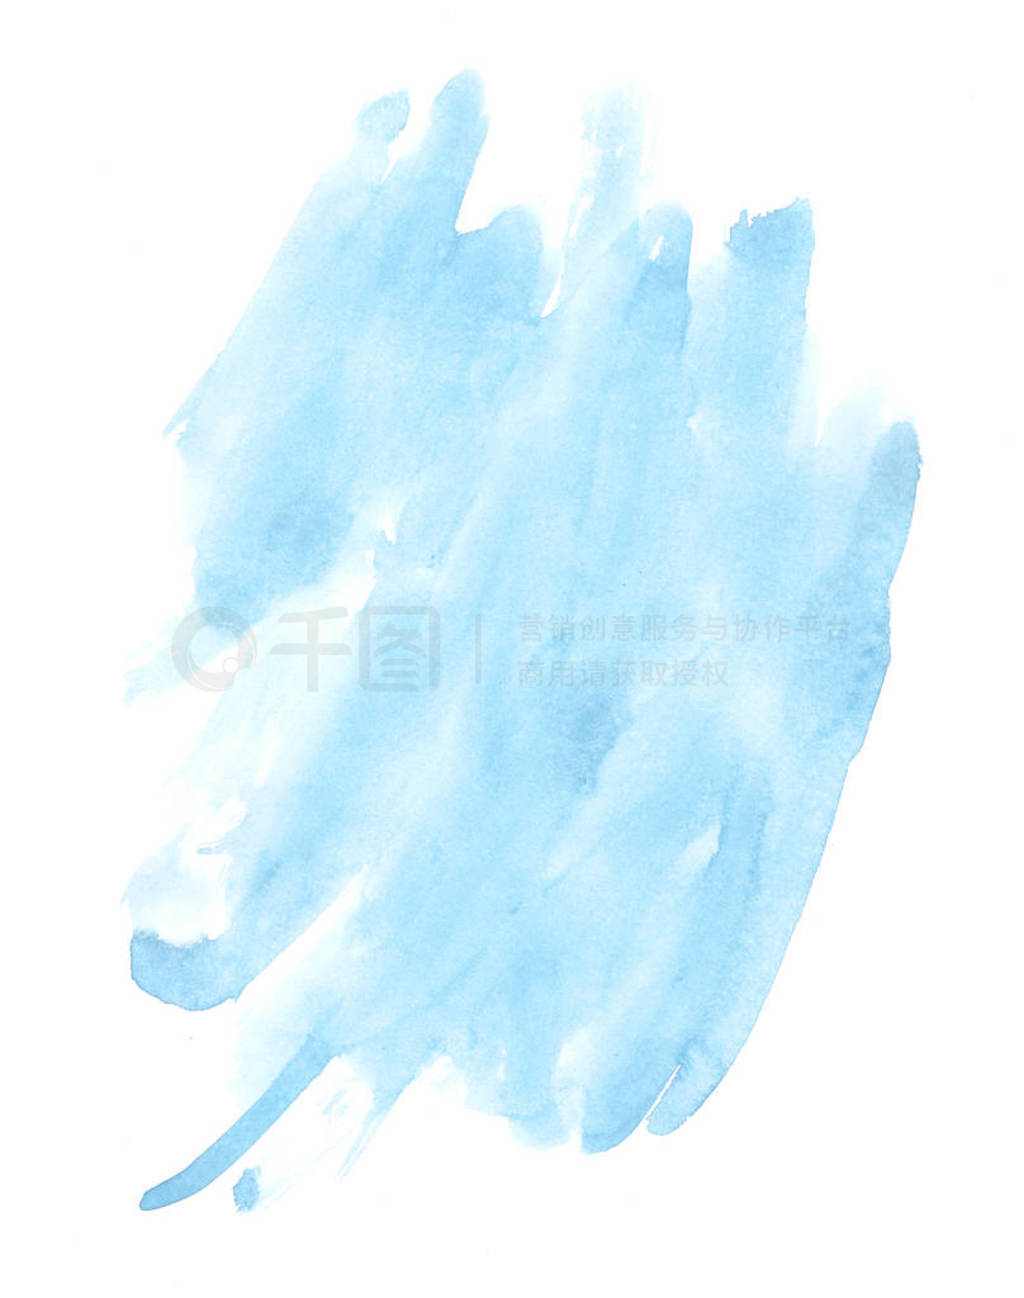 abstract watercolor background image with a liquid splatter of